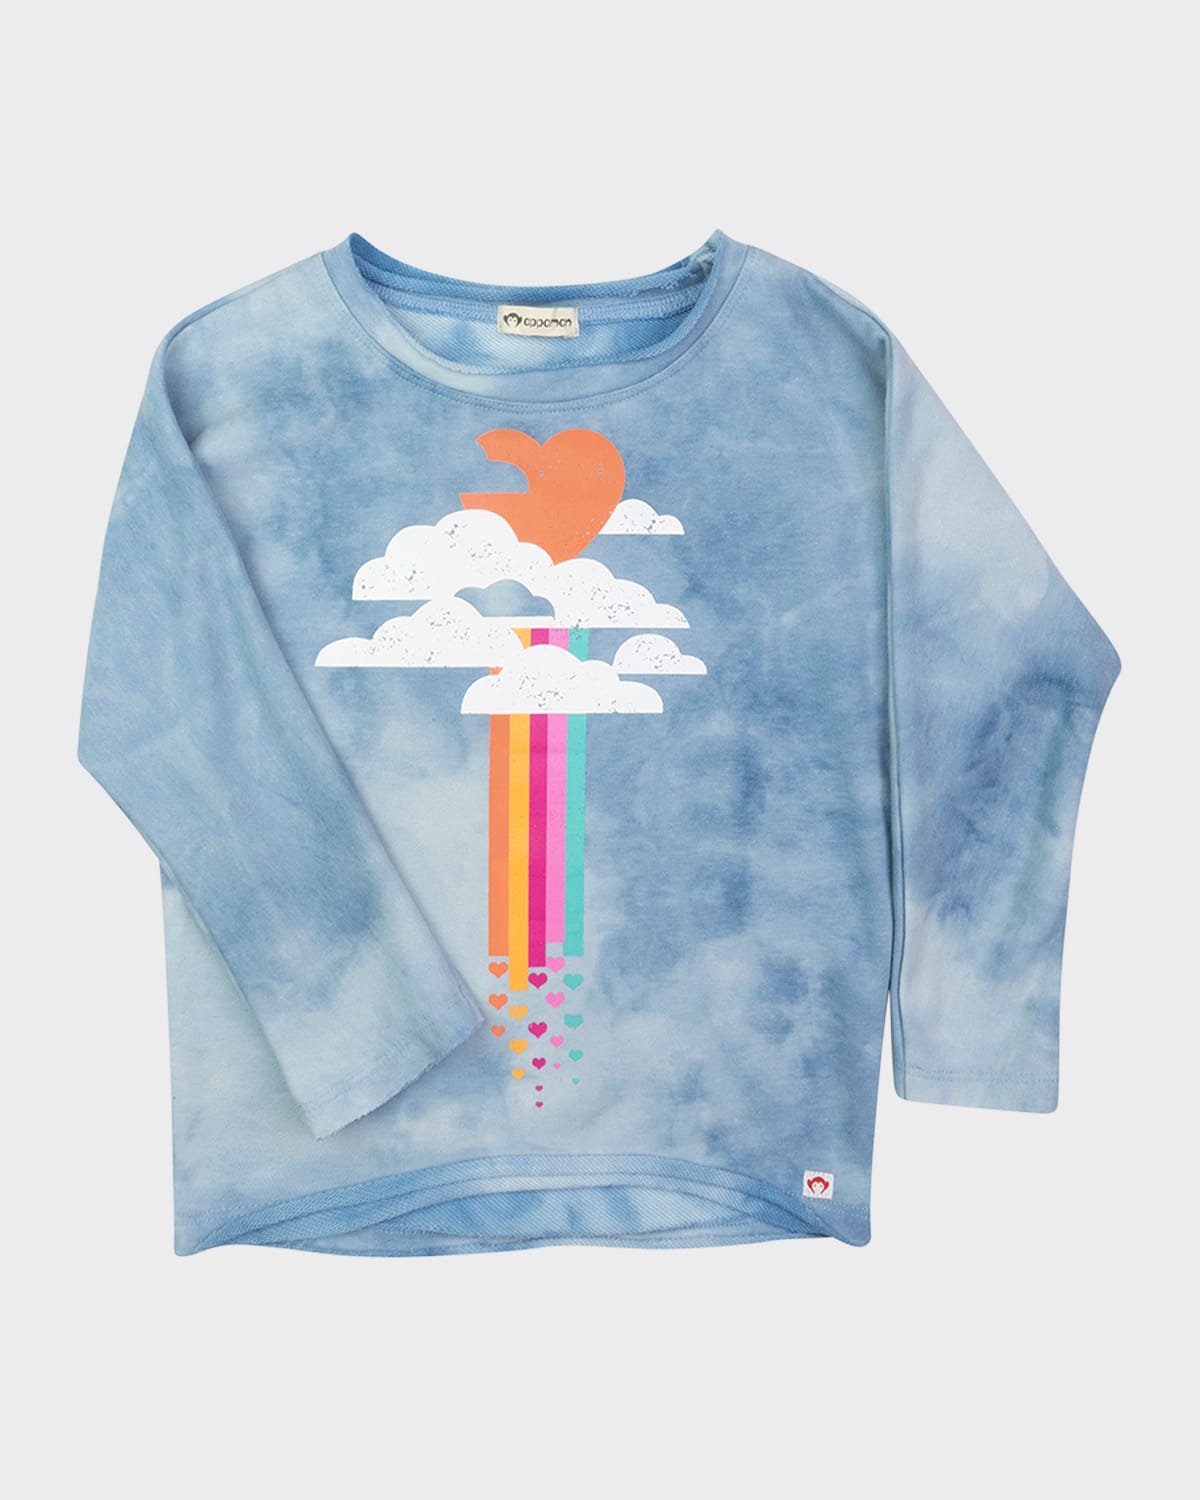 Appaman Kids' Girl's Graphic Rainbow & Clouds T-shirt In Blue Depths